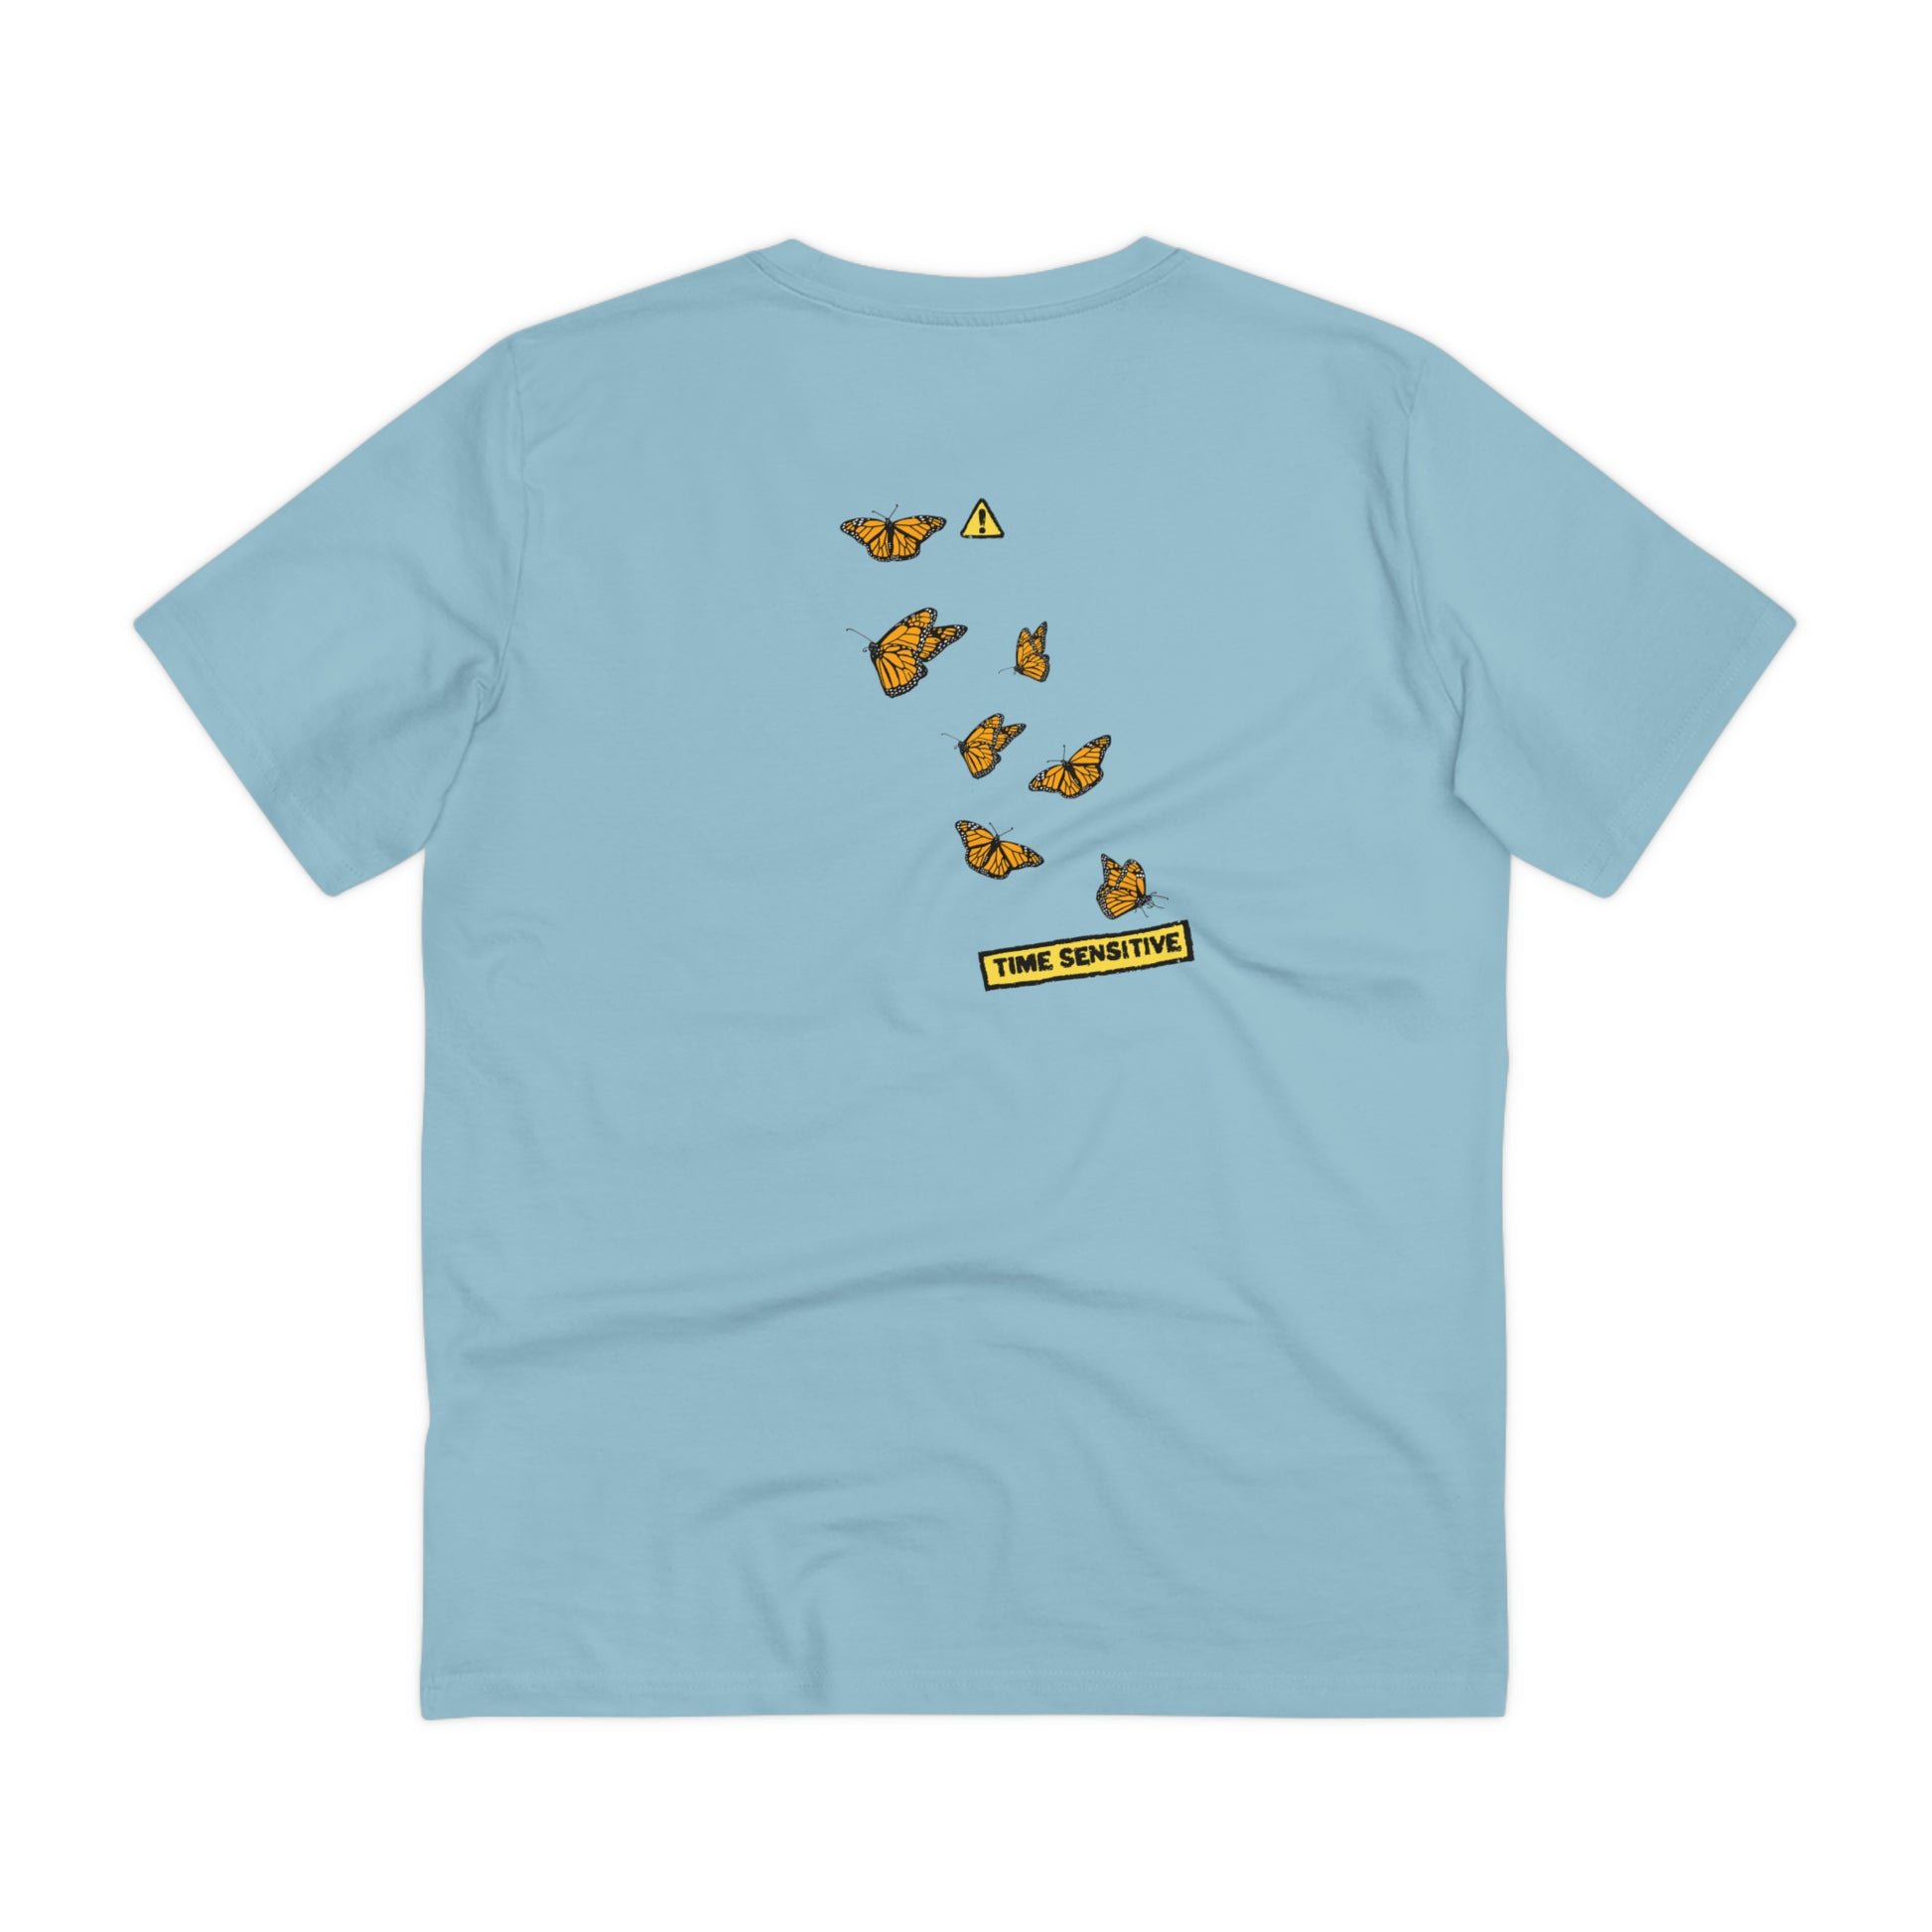 The back of The Monarch Butterfly T Shirt, Sky Blue, Cluster of Monarch Butterflies artwork. Butterfly Shirt, Butterfly T Shirt